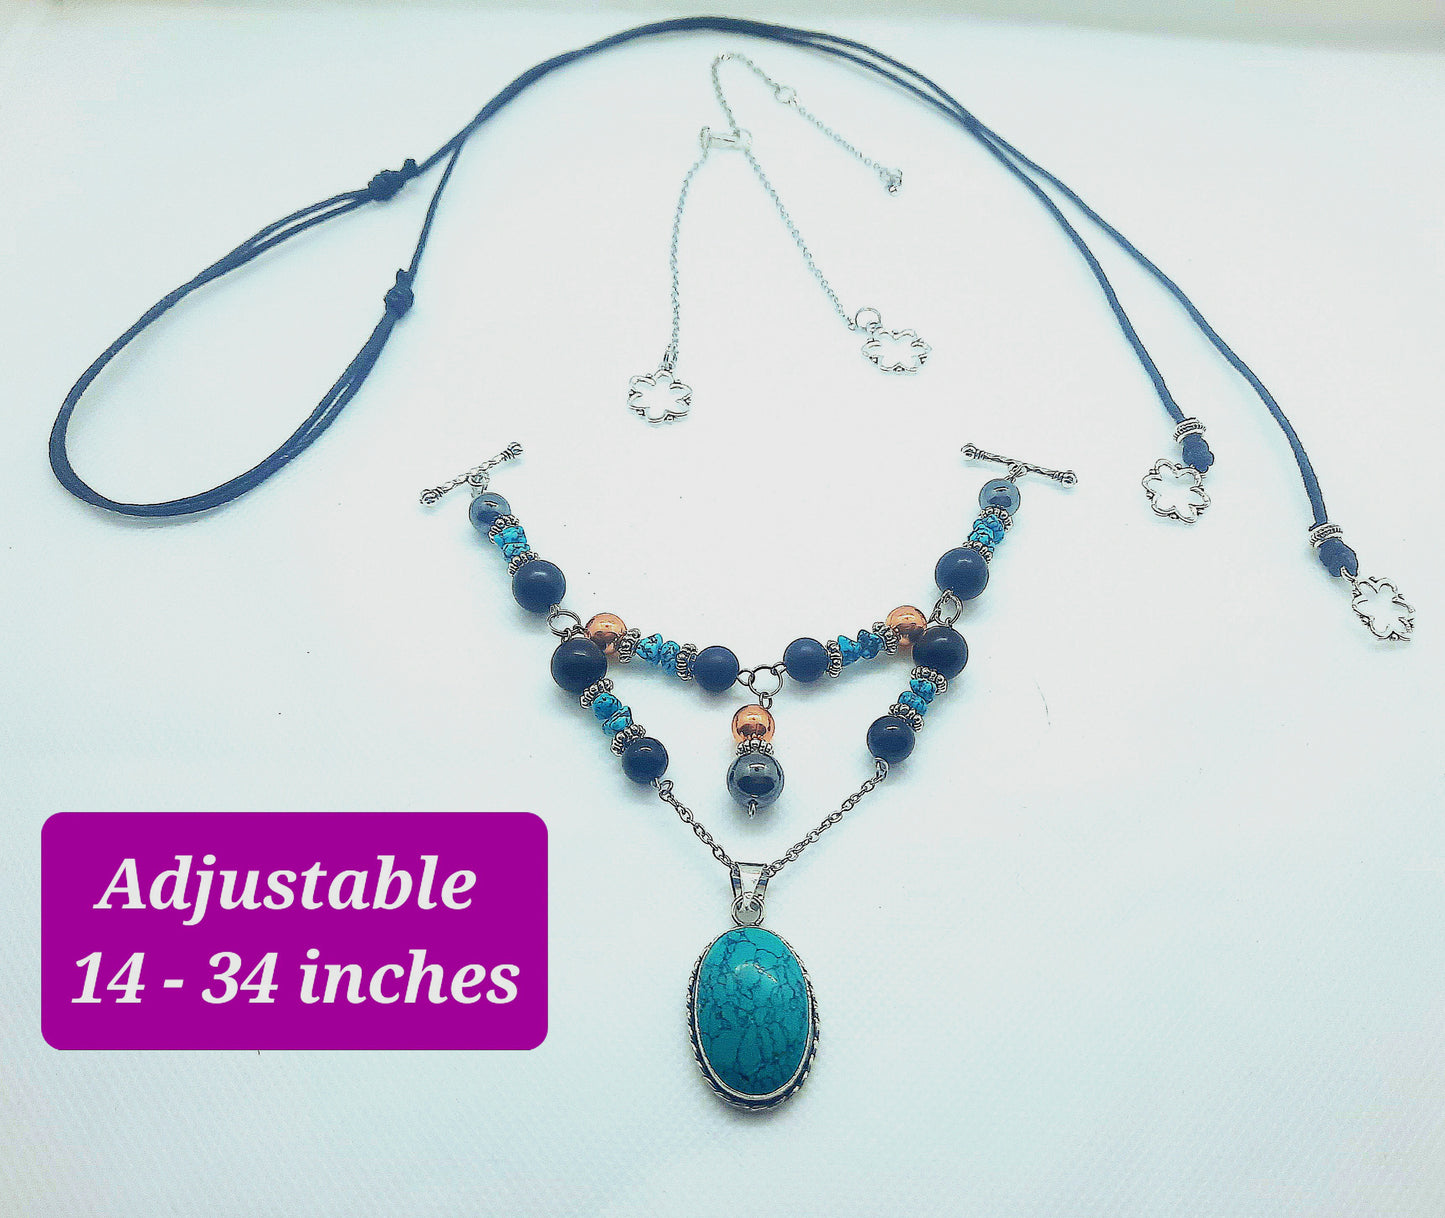 Limited Edition Turquoise Necklace EMF 5G Protection Shungite Copper Tourmaline Hematite Necklace Adjustable Lengths